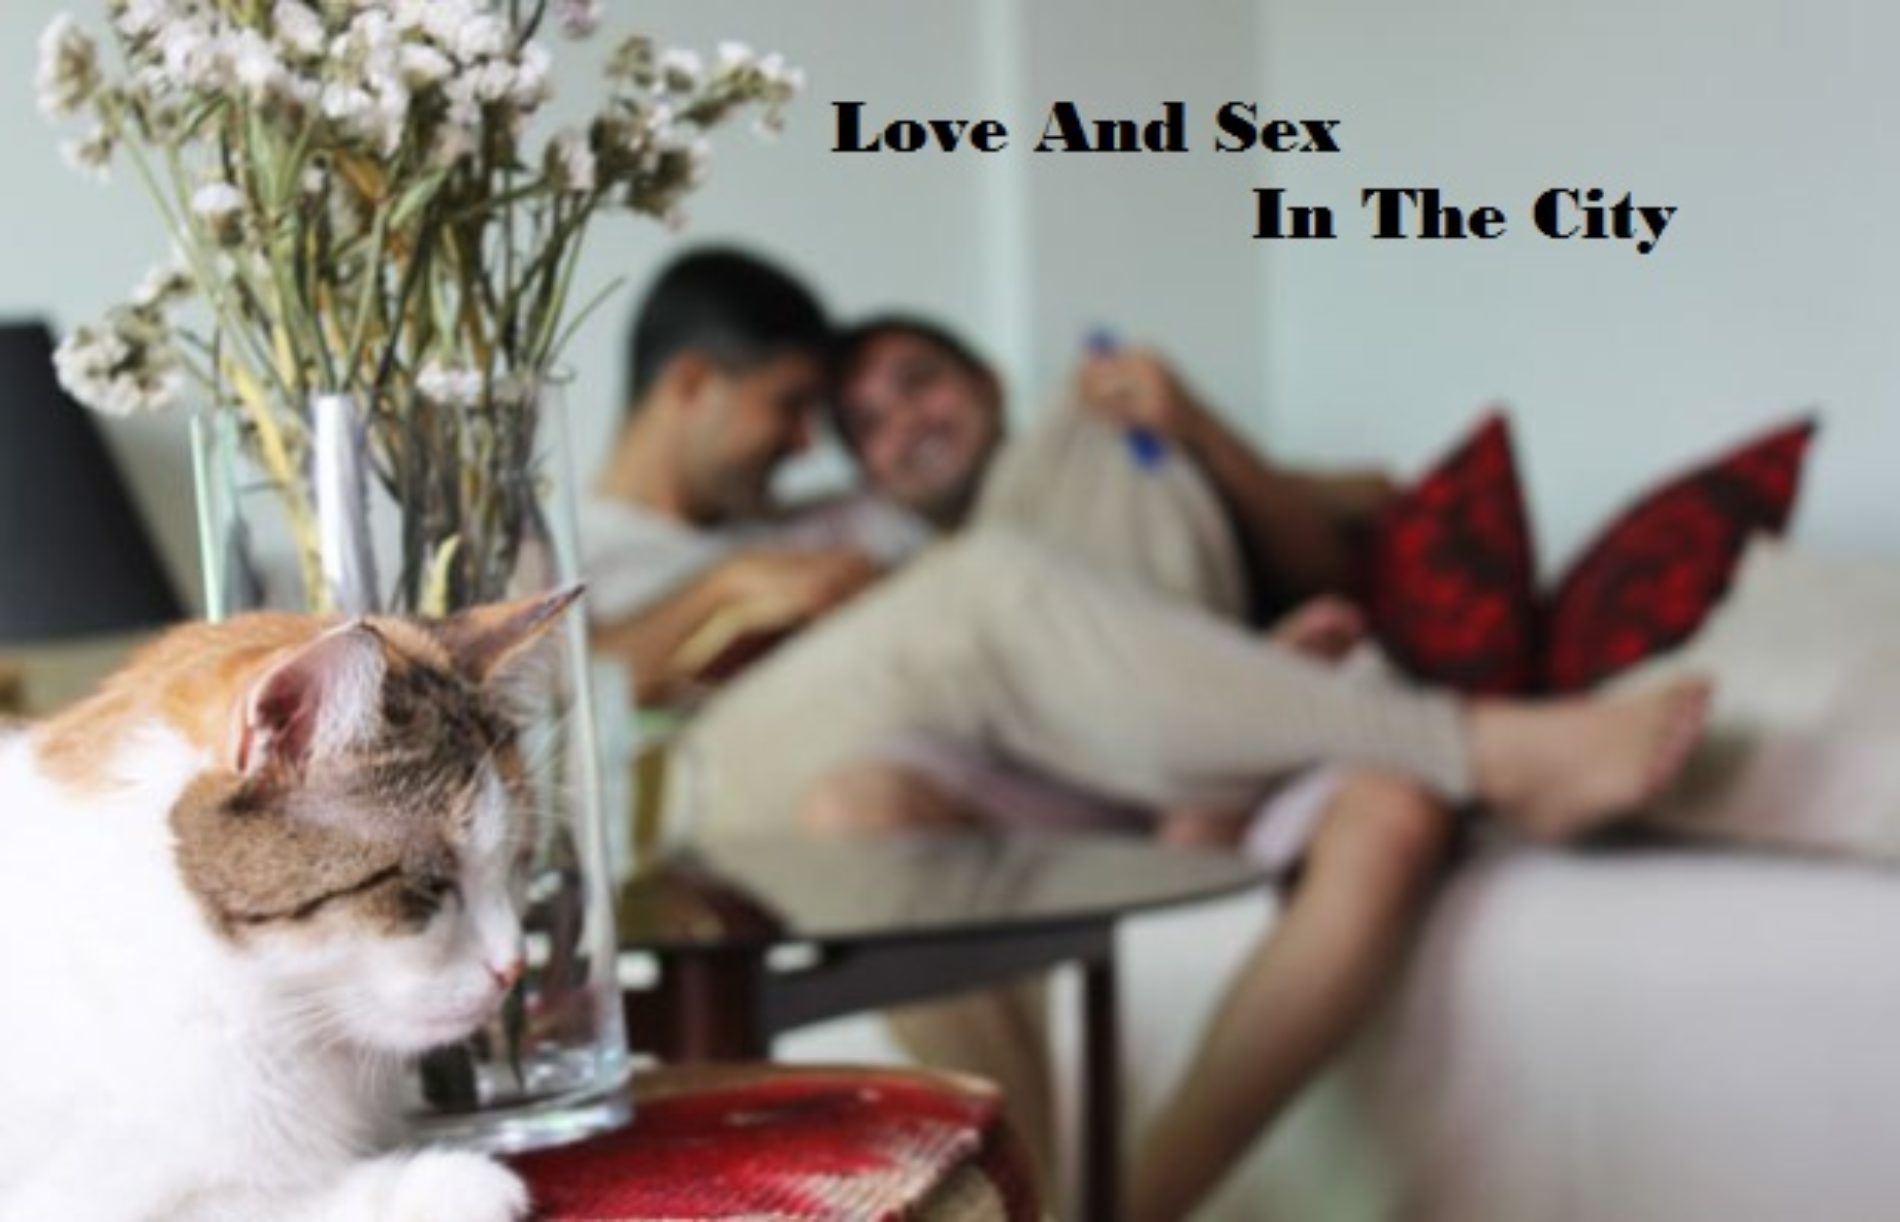 LOVE AND SEX IN THE CITY (Episode 29)